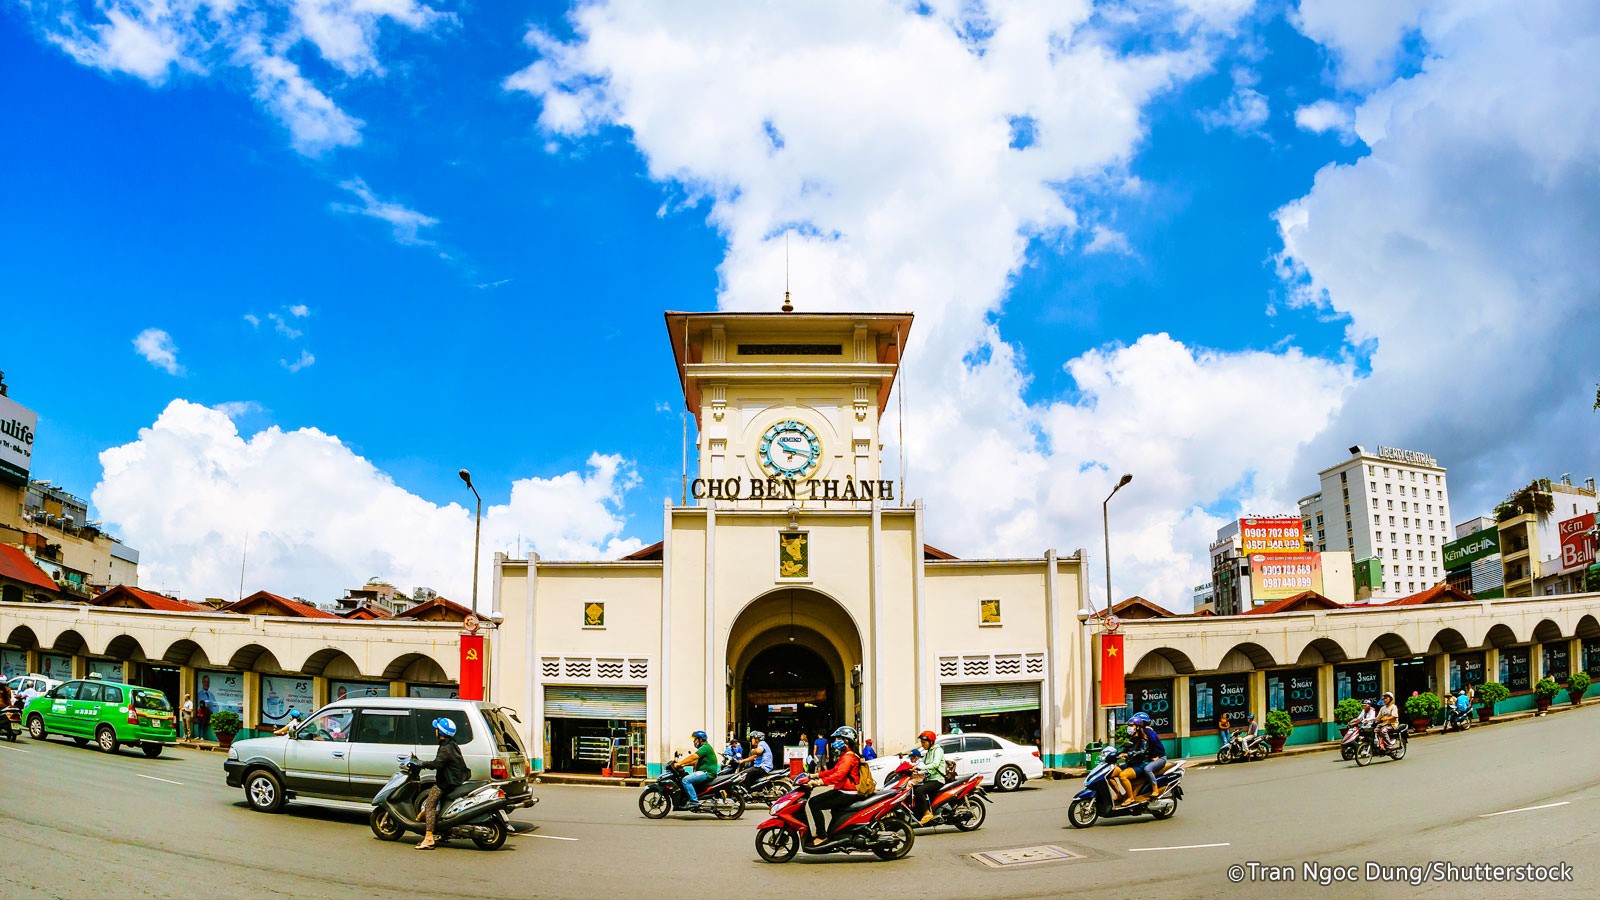 Vietnam - A paradise for shopping lovers - Yallavietnam